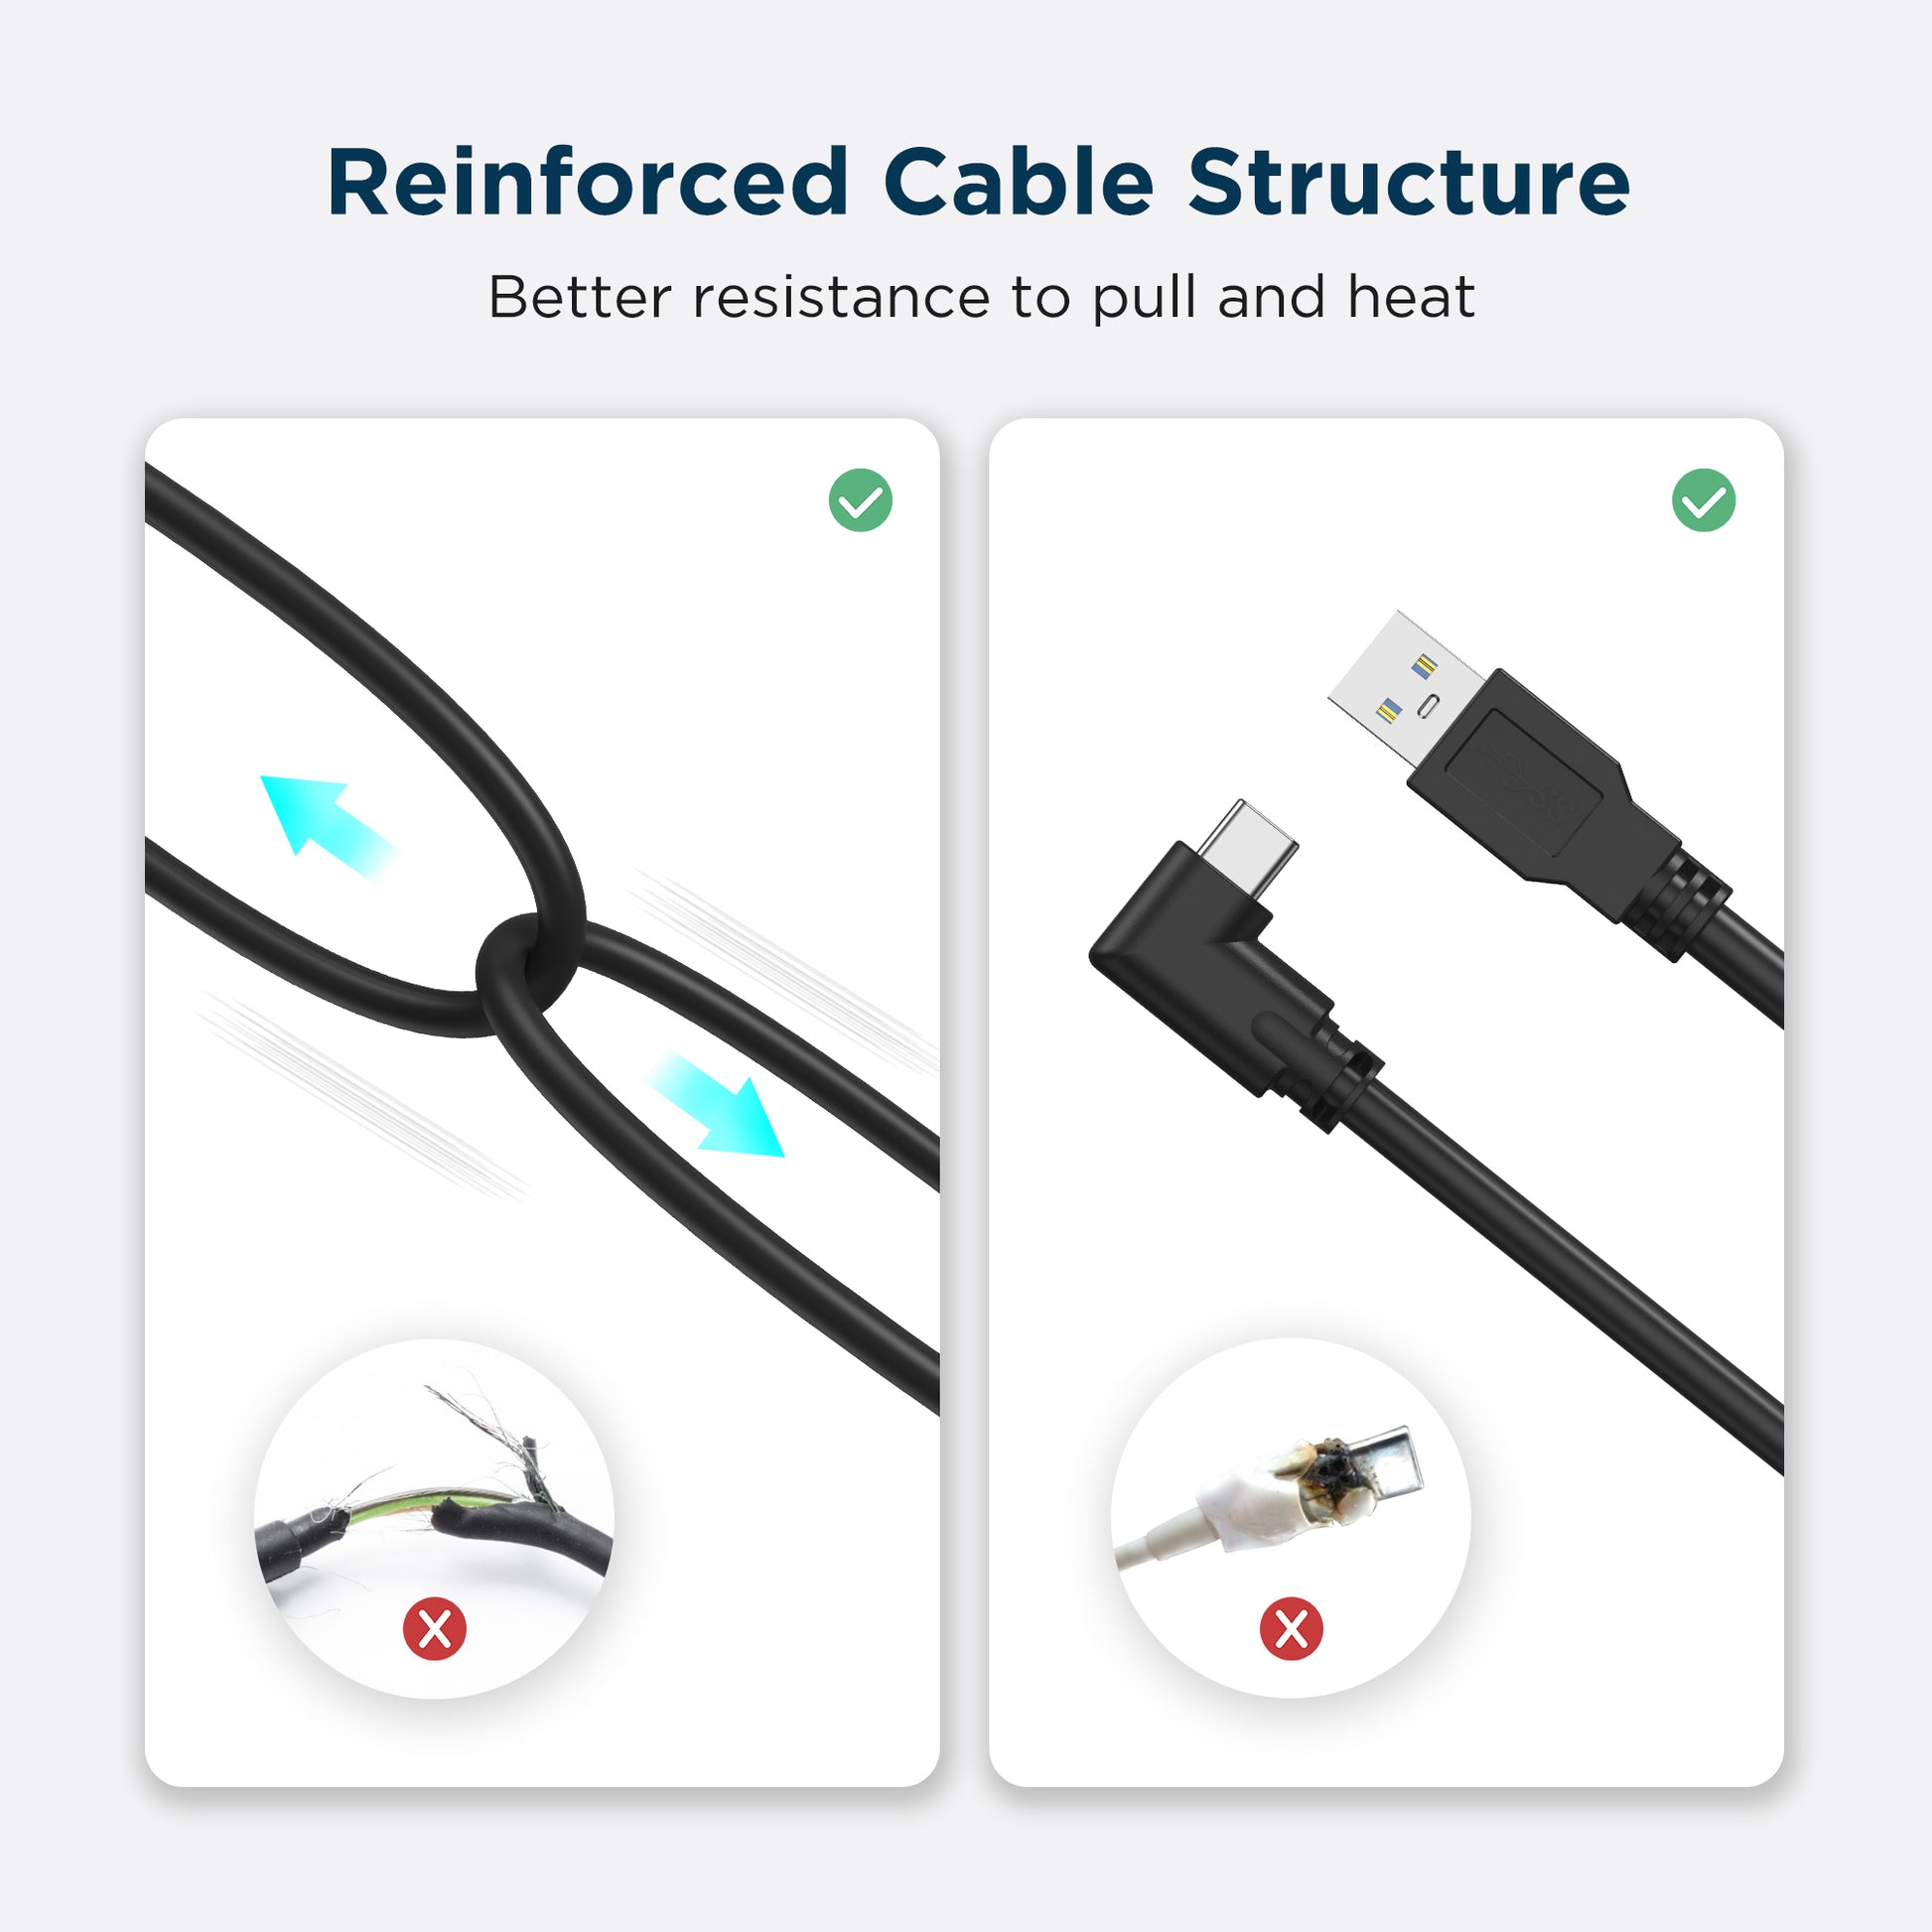 link cable for oculus quest 2